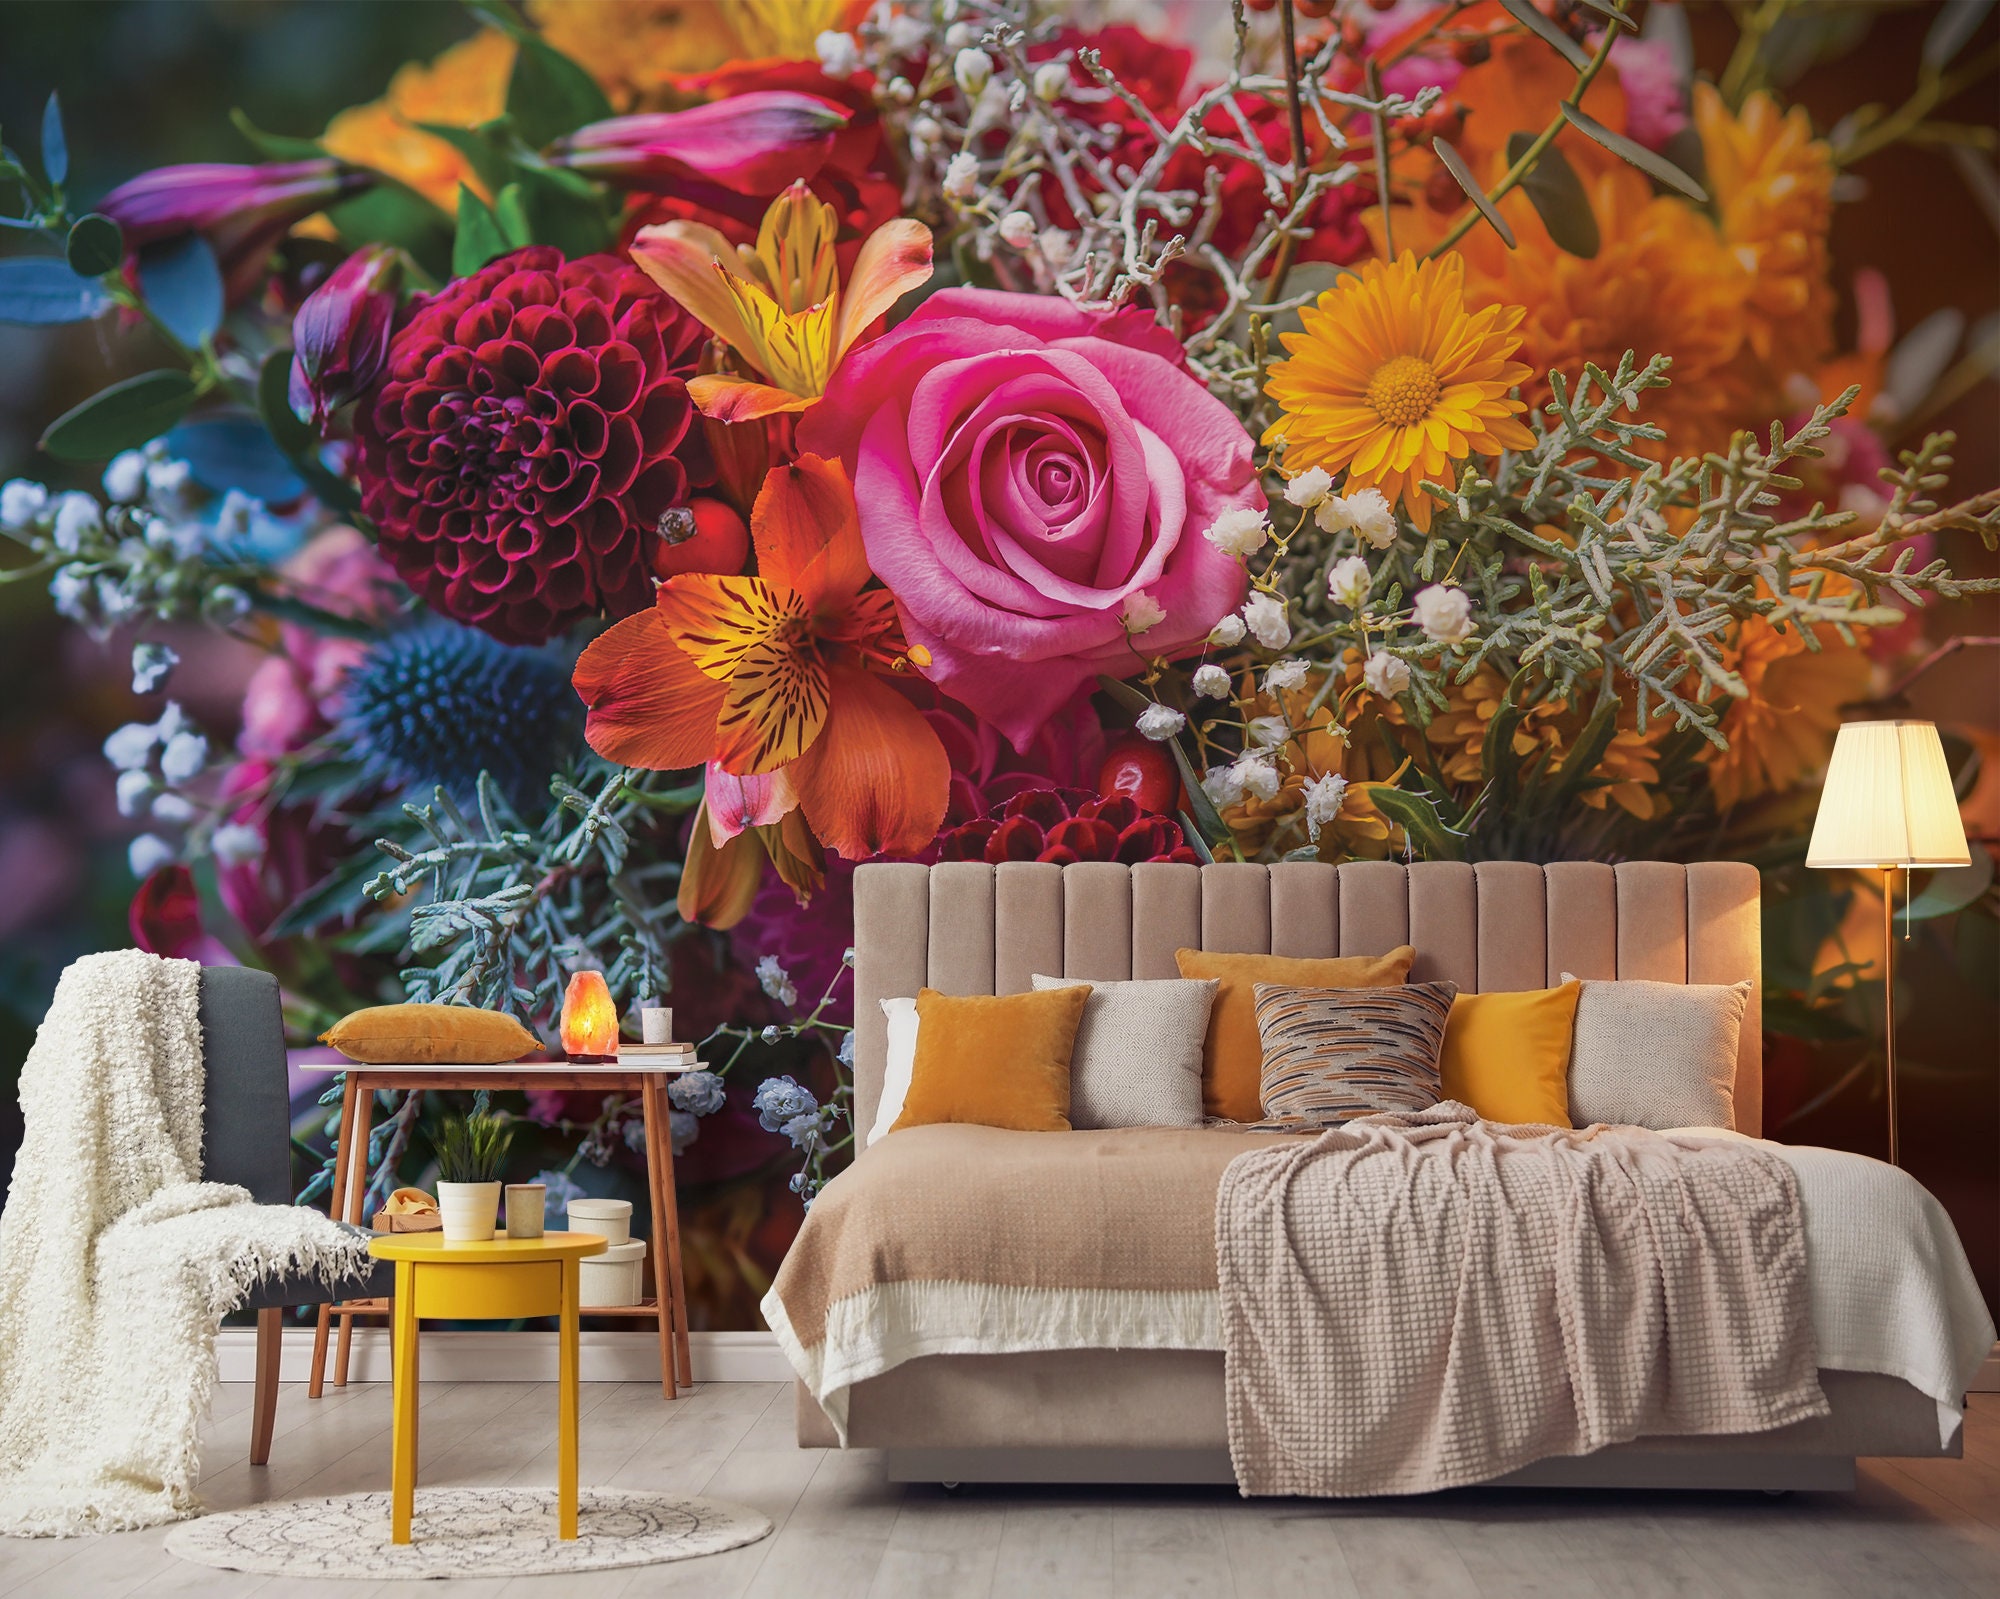 3d Flower Wallpaper For Home Decoration Modern Wallpapers Design For Tv  Wall Self Adhesive Paper Bedroom Tv Background  Buy Flower Large Wall  Mural For HouseWallpaper Design For Tv Wall3d Wallpaper Home